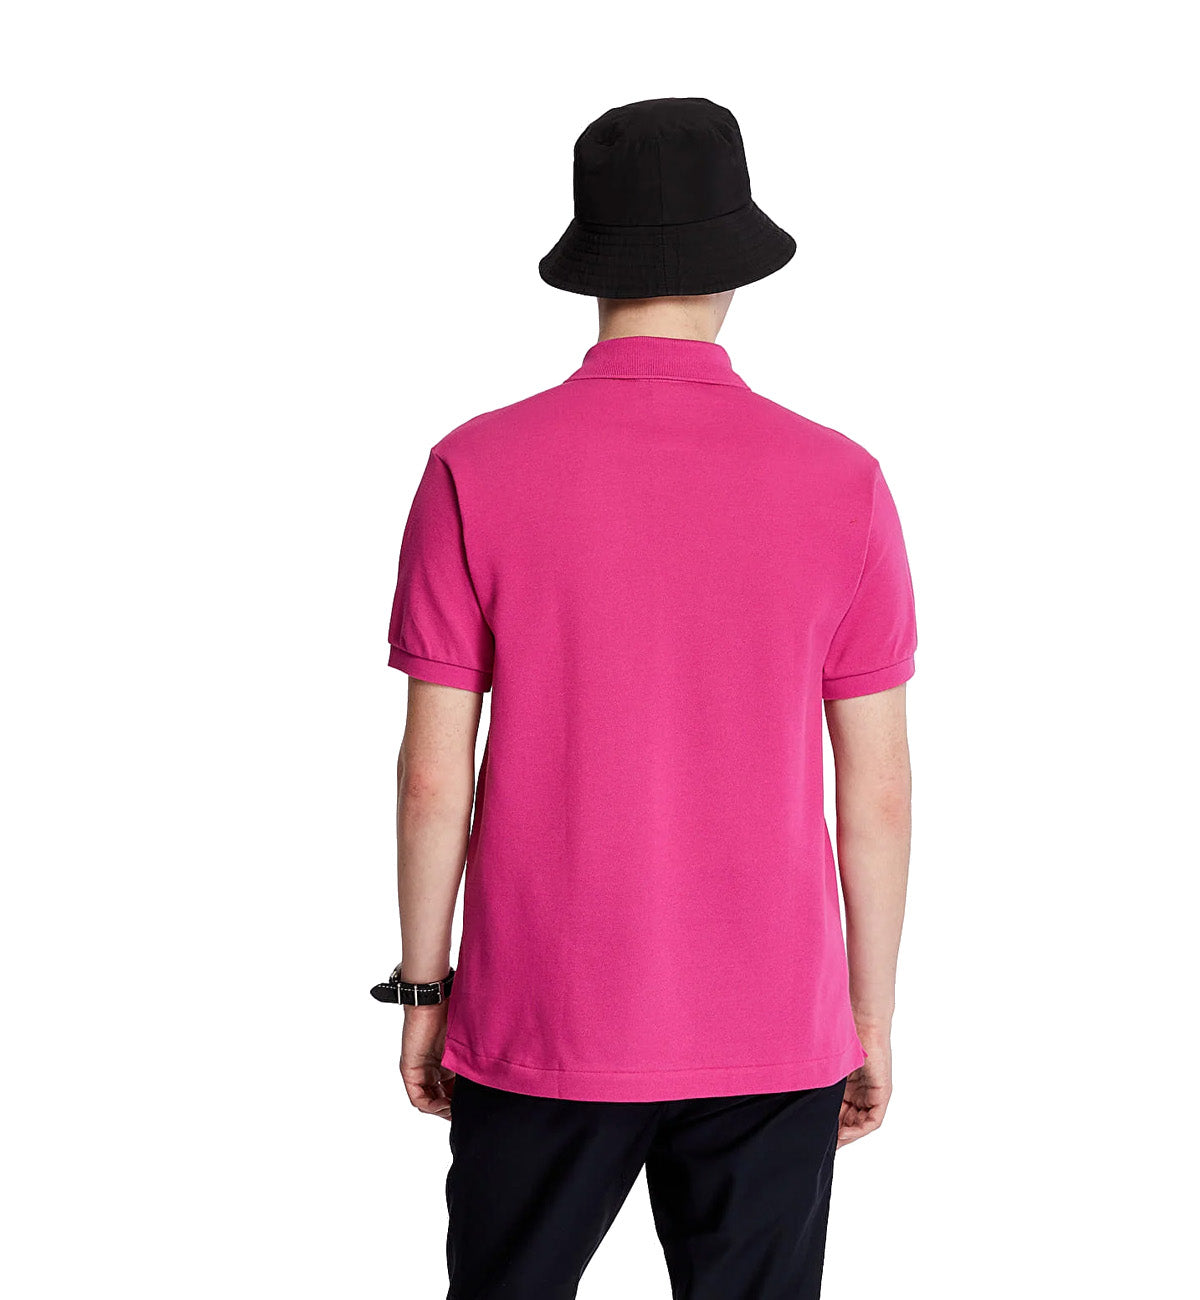 Lacoste Classic Fit Cotton Polo Shirt (Rose Pink)